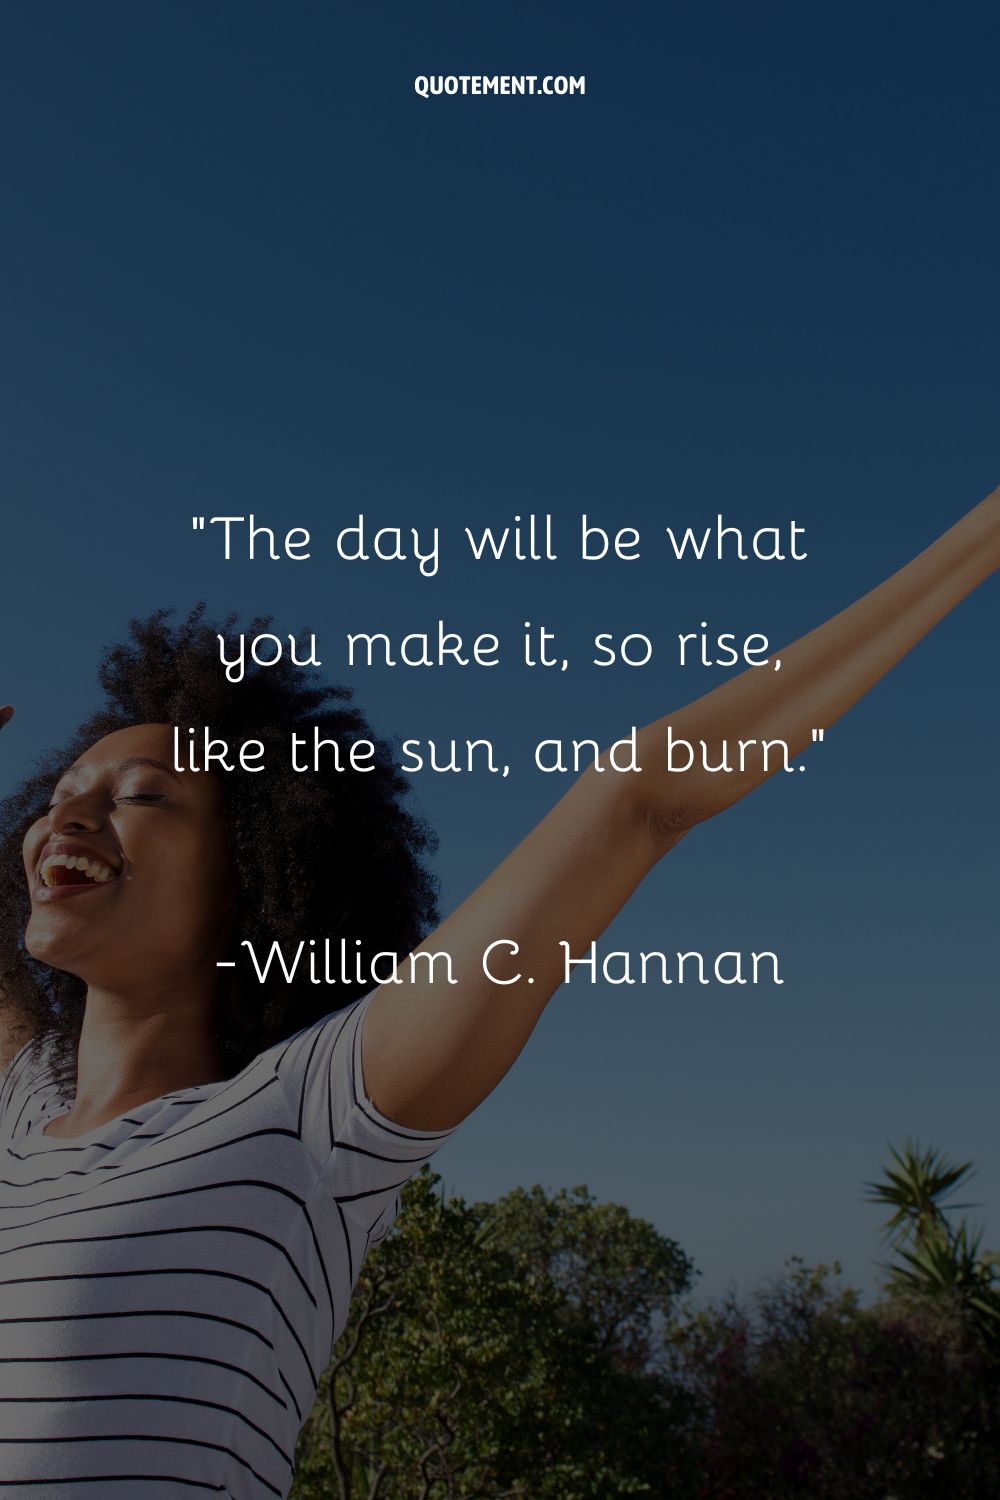 The day will be what you make it, so rise, like the sun, and burn.